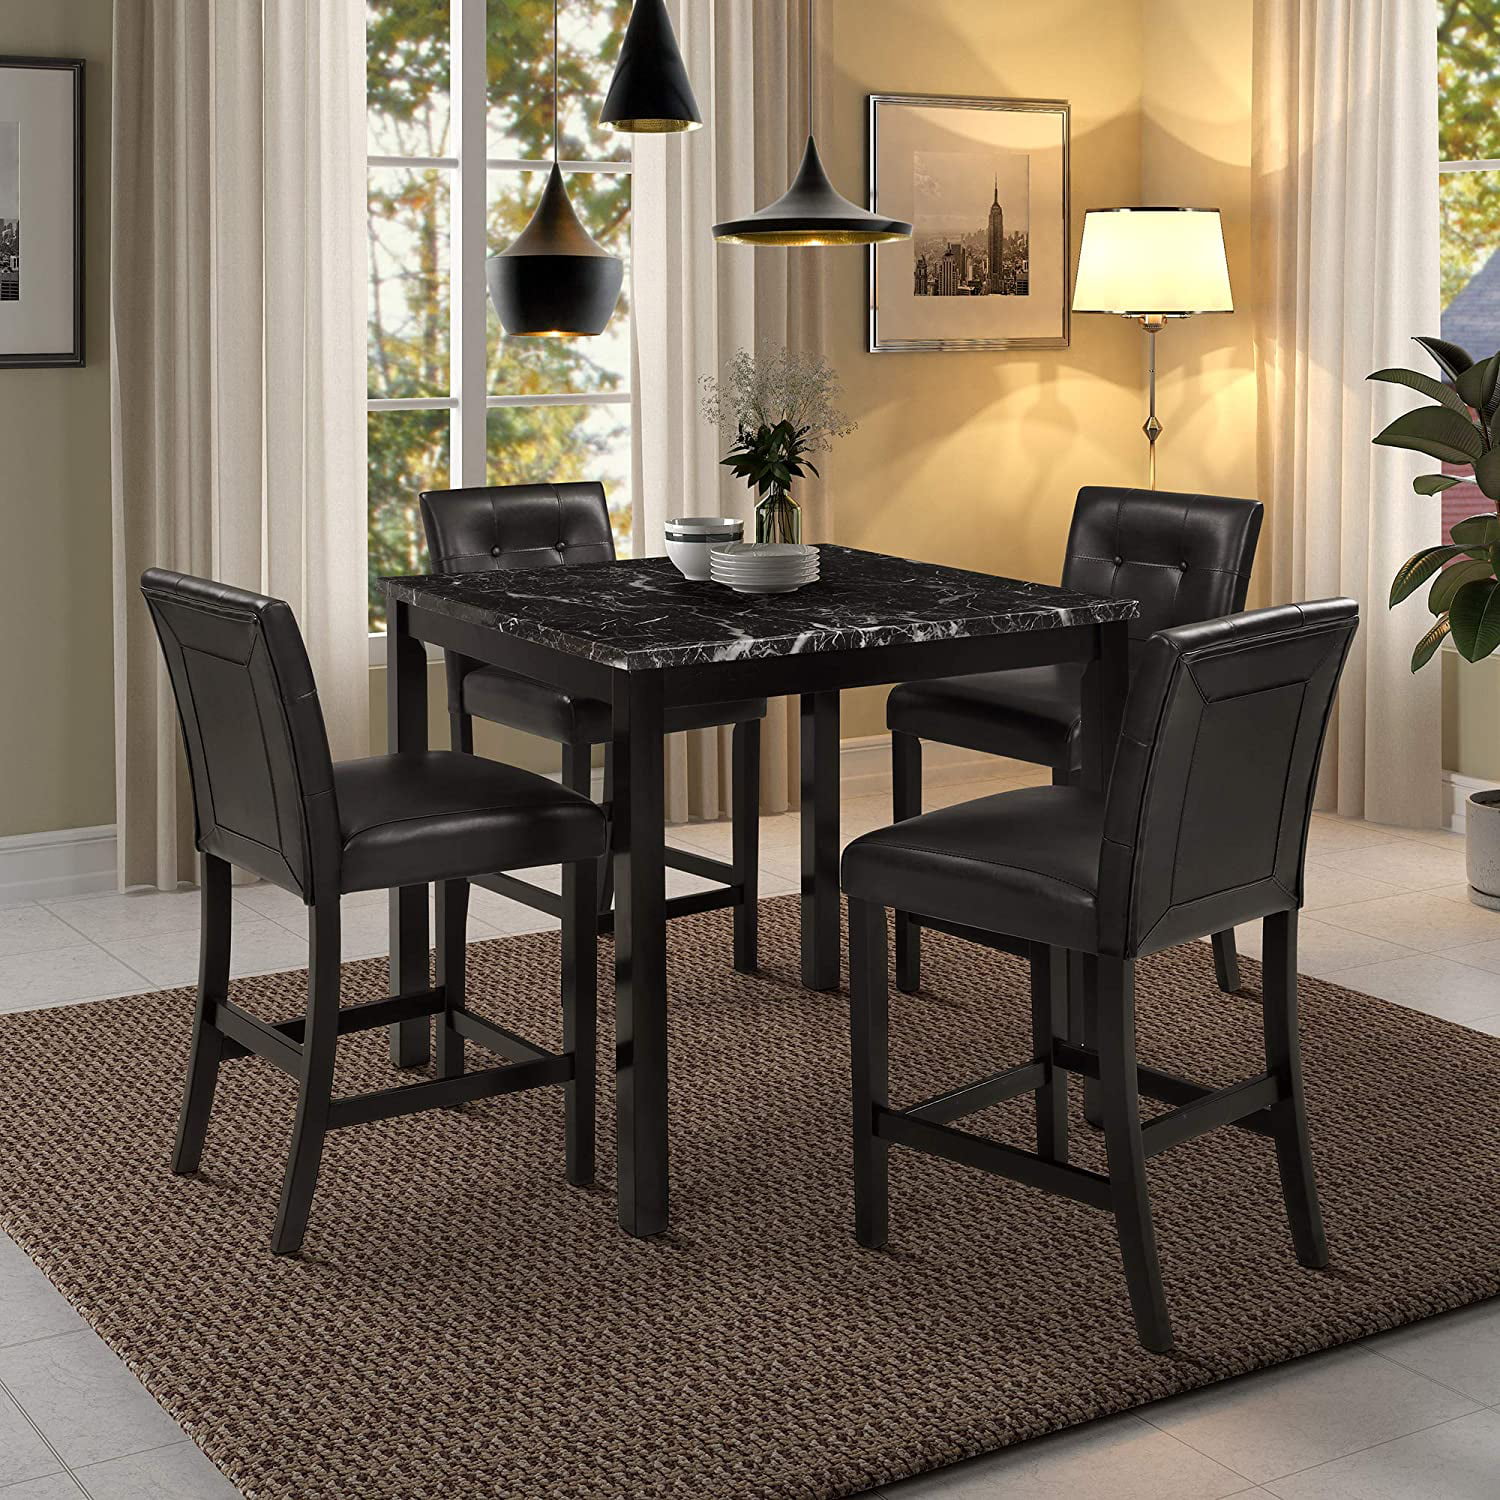 5 Piece Kitchen Table Set Faux Marble, Black High Top Kitchen Table And Chairs